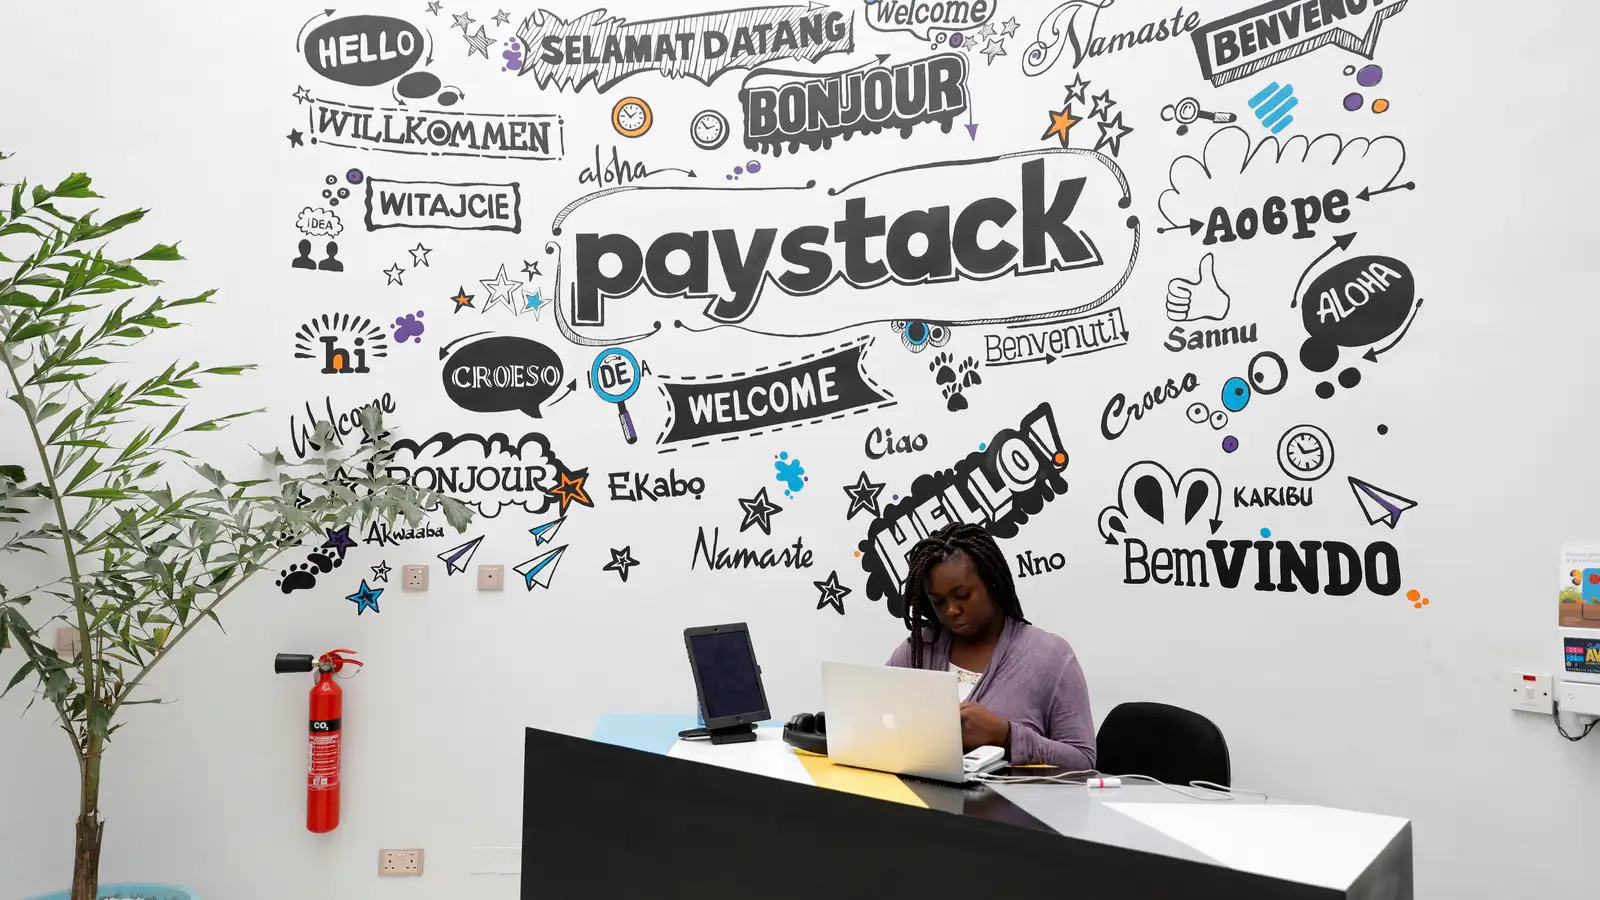 Paystack office reception. Image: Reuters/Akintunde Akinleye